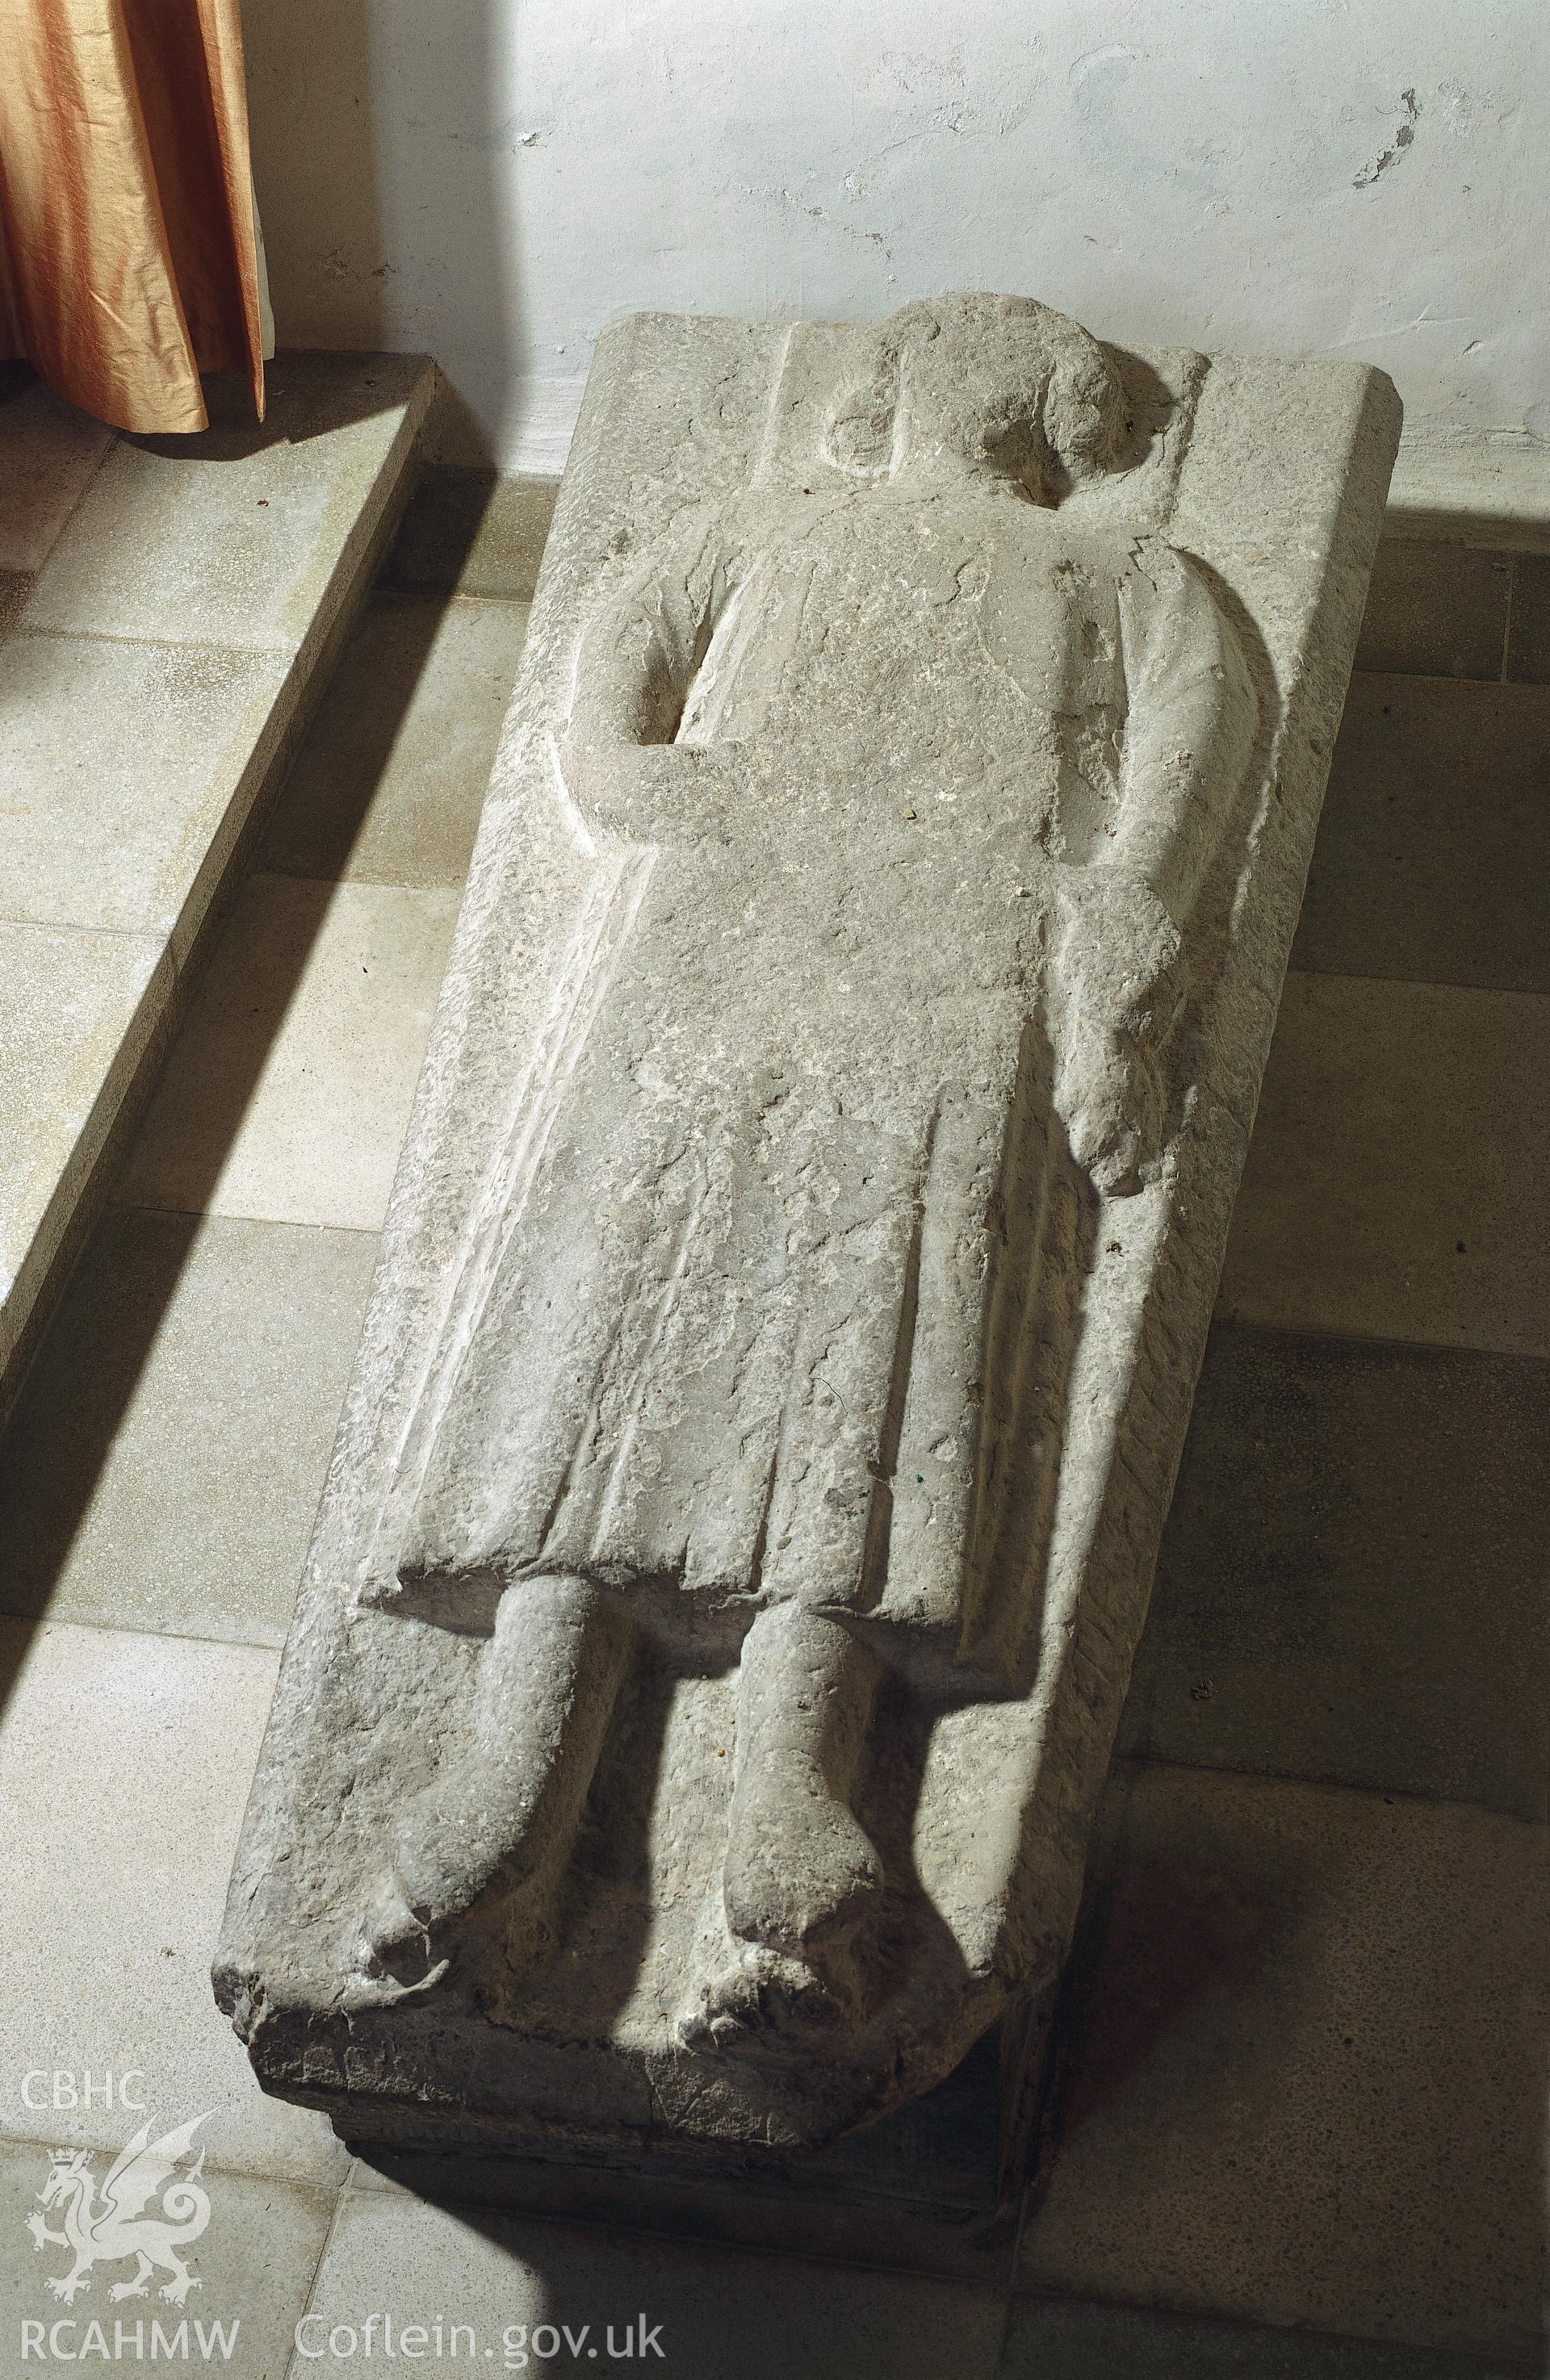 RCAHMW colour transparency showing detail of a male effigy, in St Mary's Church, Kidwelly.